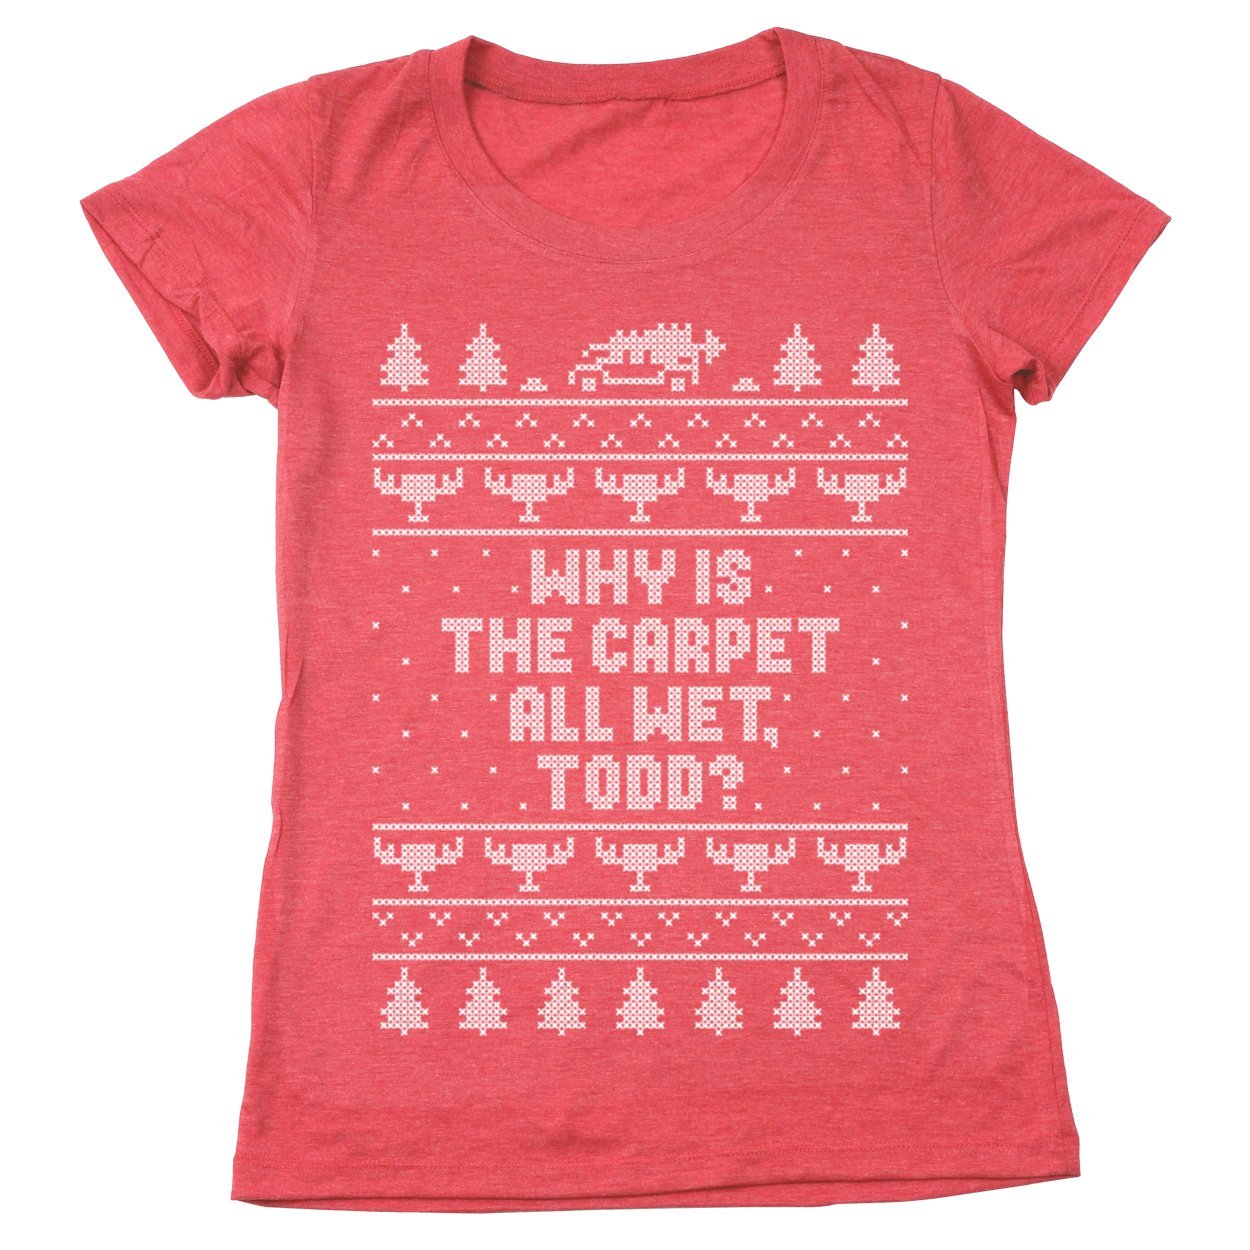 Why Is The Carpet Wet Todd Women's Relaxed Fit Tri-Blend T-Shirt